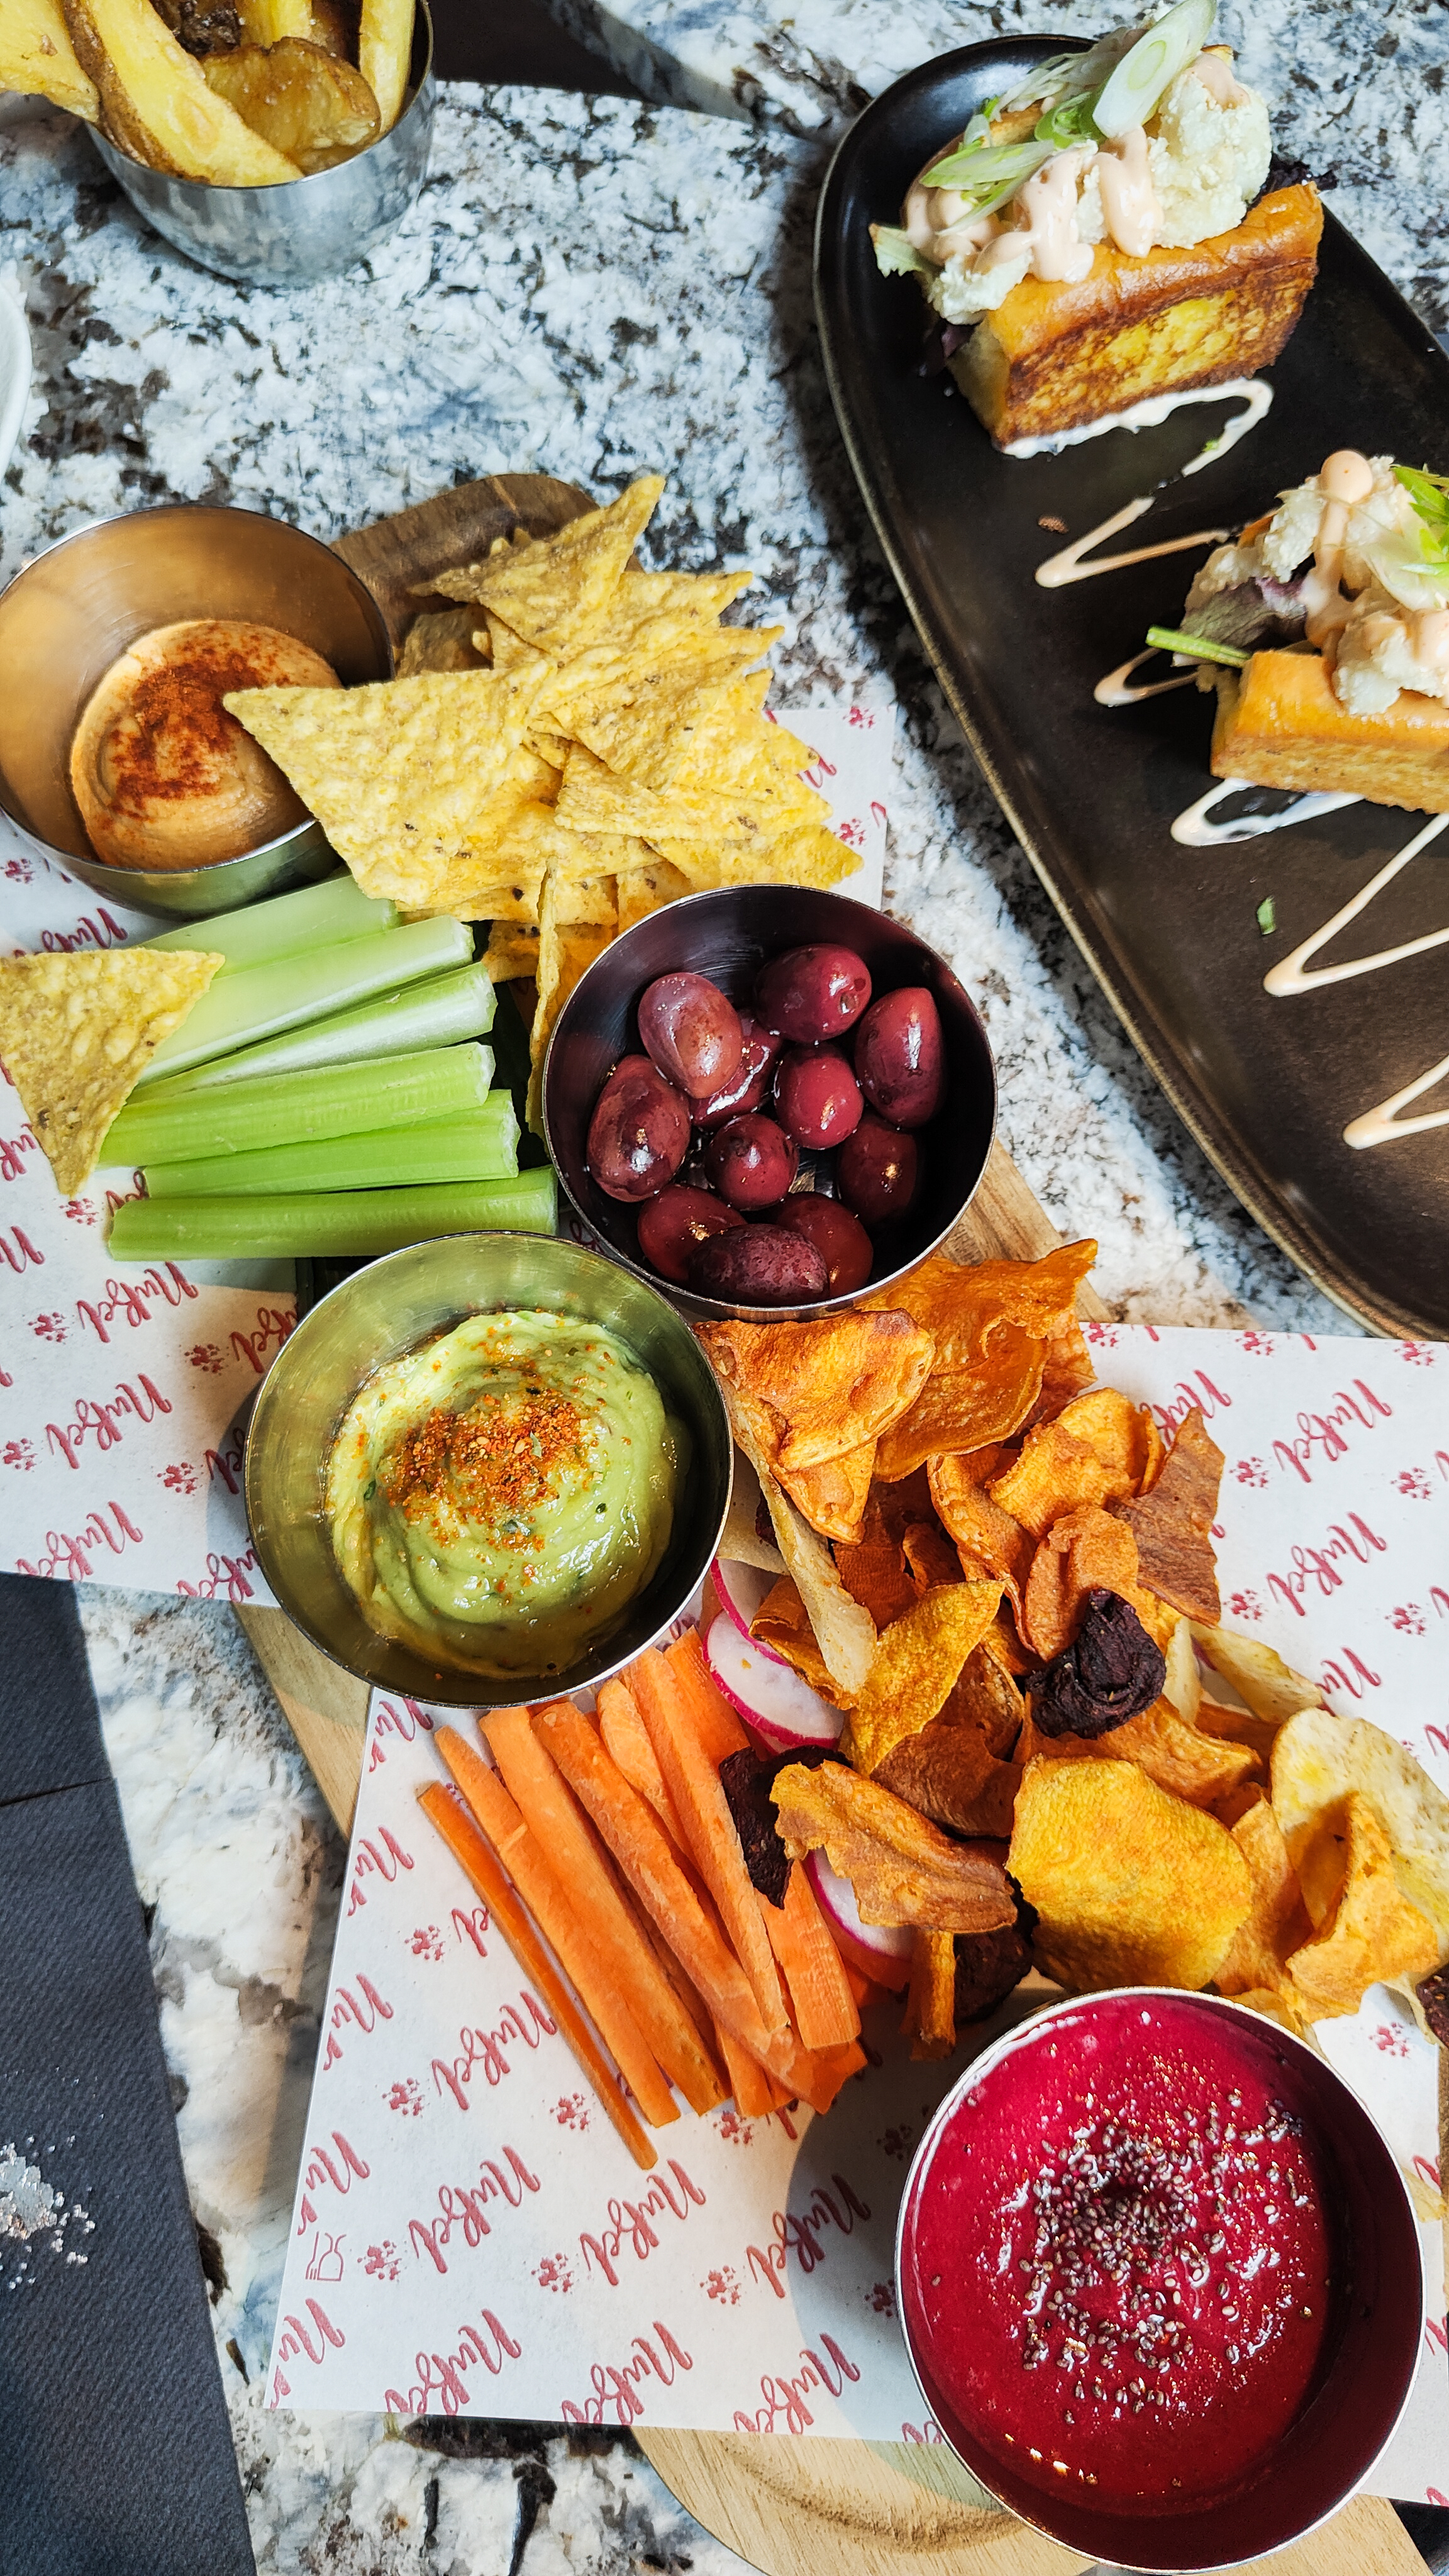 Table of guacamole, traditional hummus, beet hummus with tortilla chips, vegetable chips and veggie crudités.